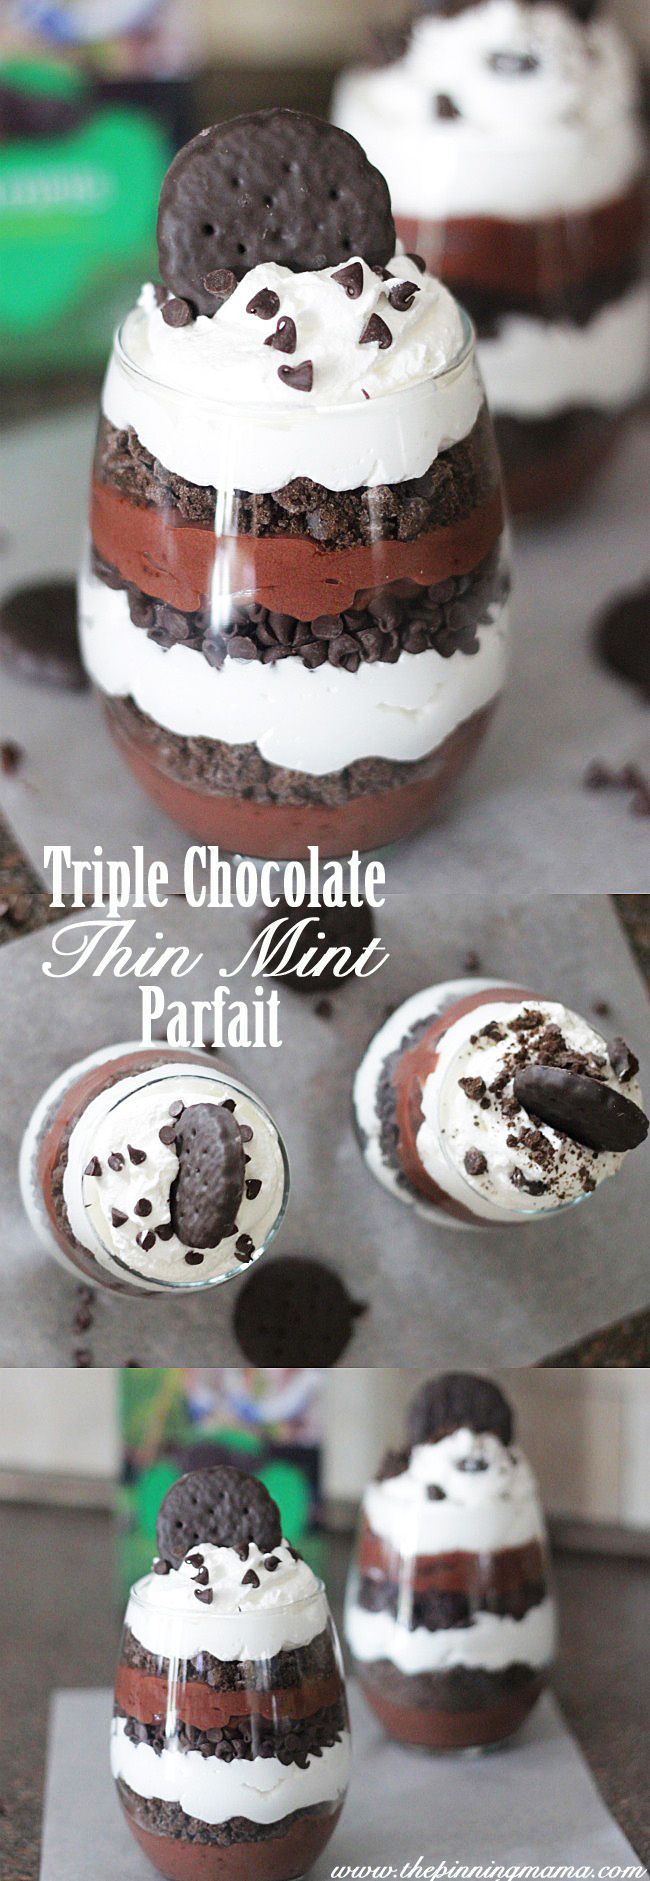 Who knew it was so easy to make a dessert this pretty? Triple Chocolate Thin Mint Parfait Recipe